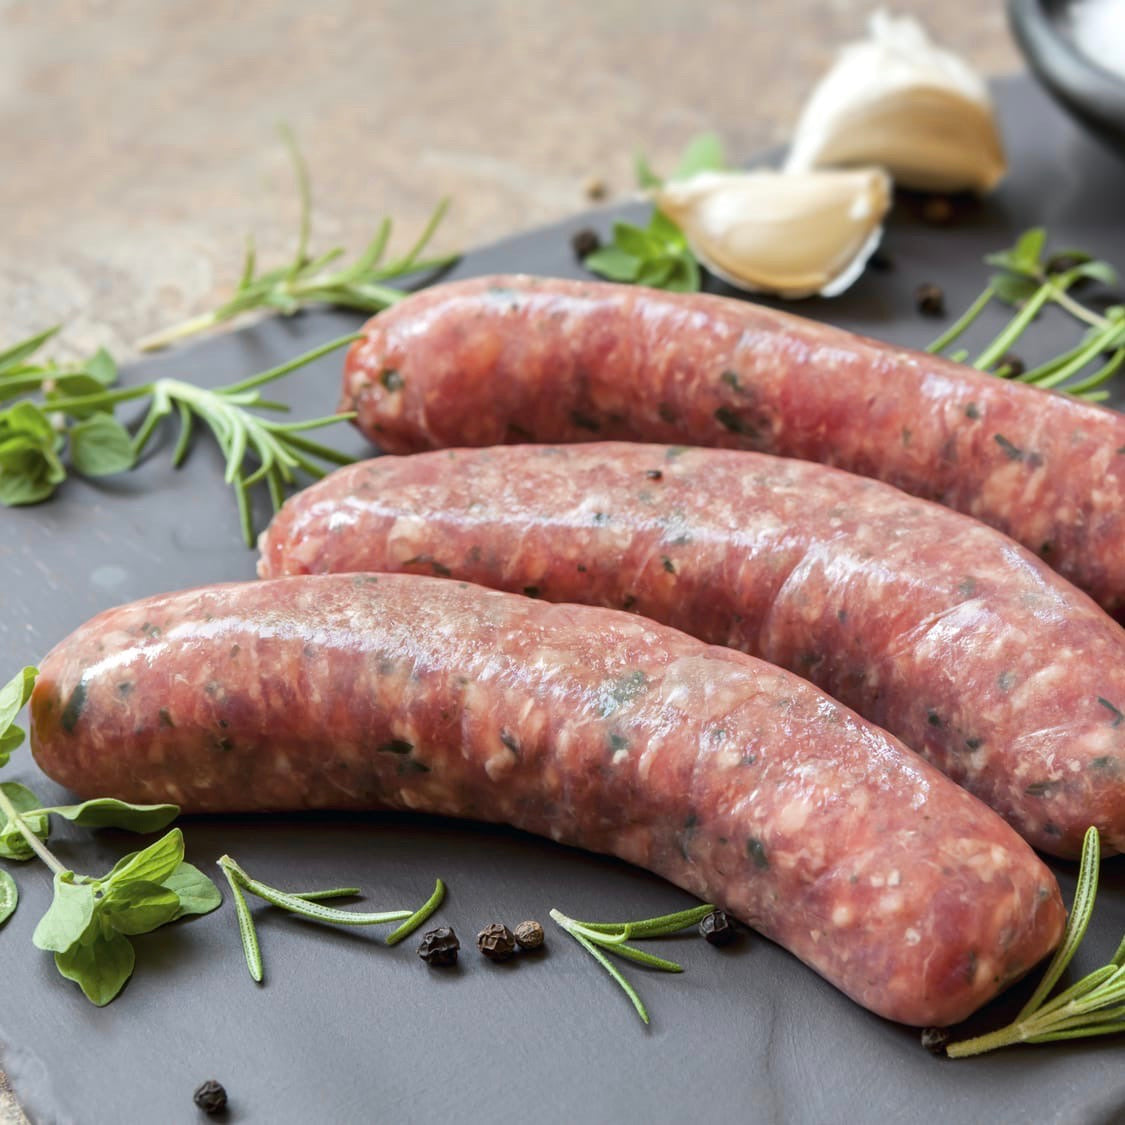 Shop Wagyu Sausage in Singapore - The New Grocer